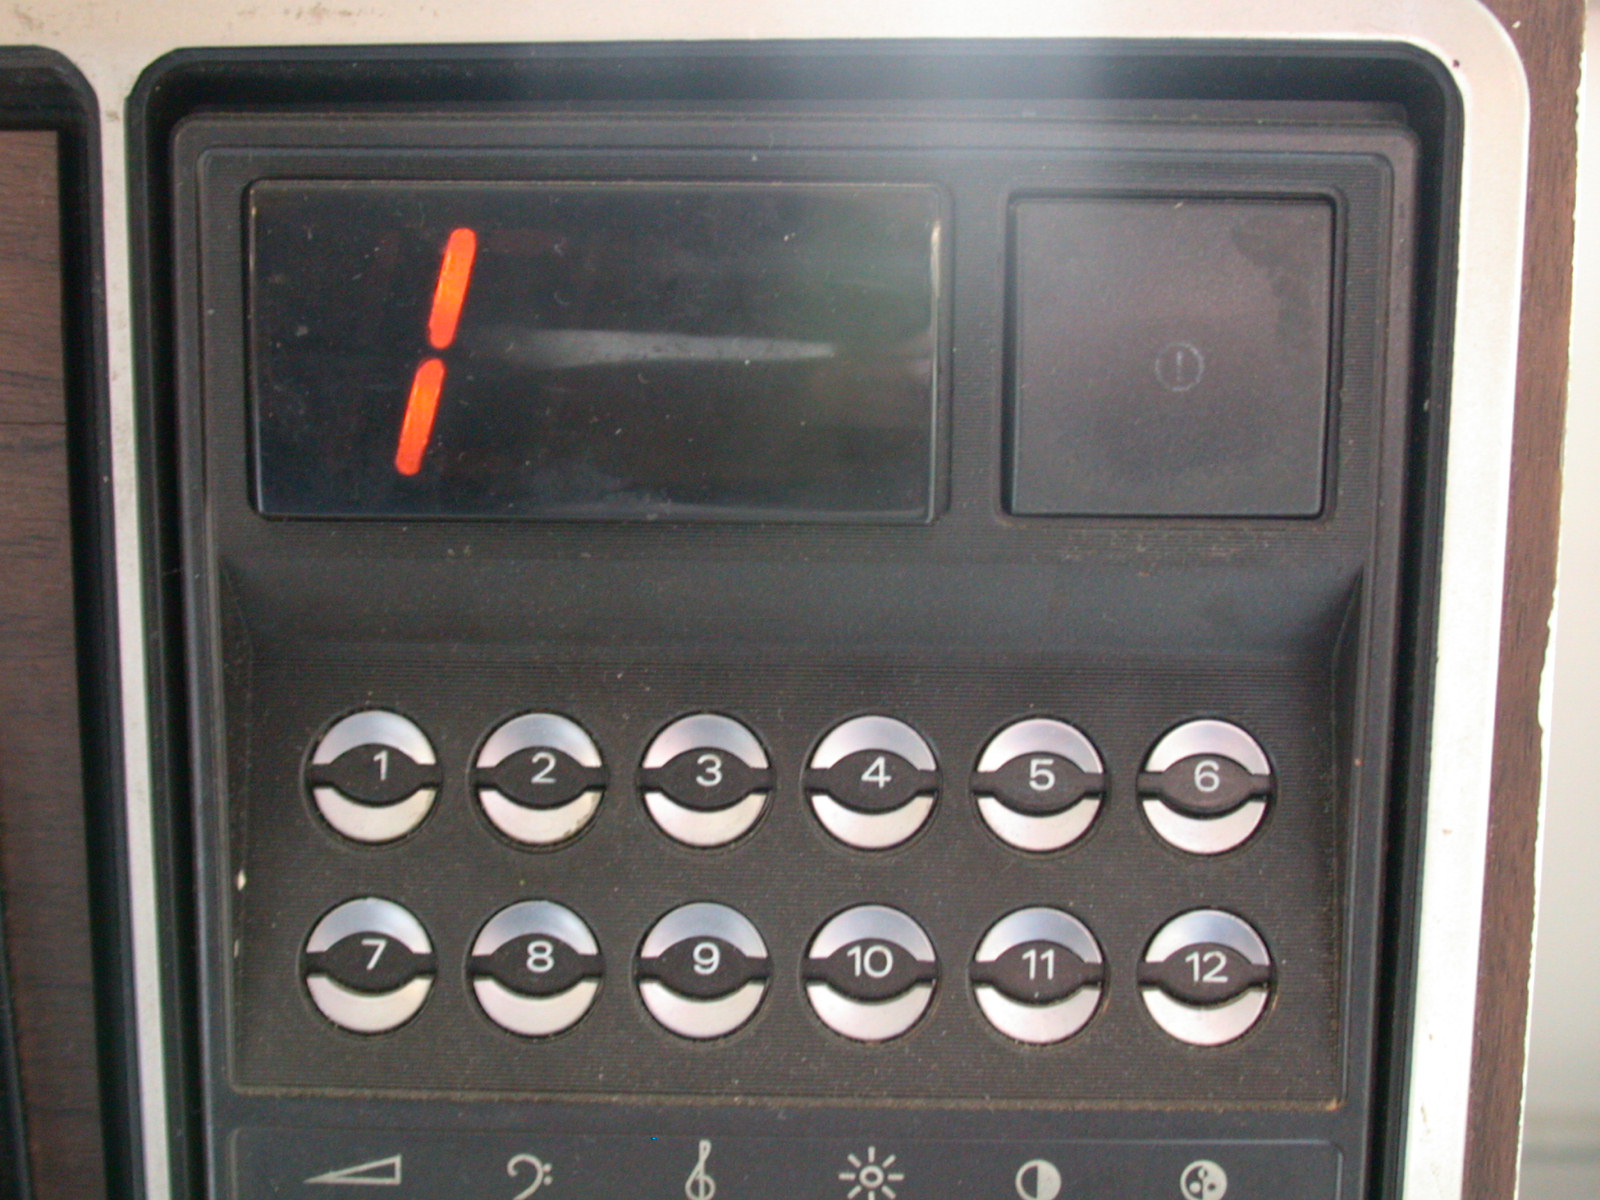 typo typography television tv tellie 1 numbers mechanics channel button buttons metal plastic